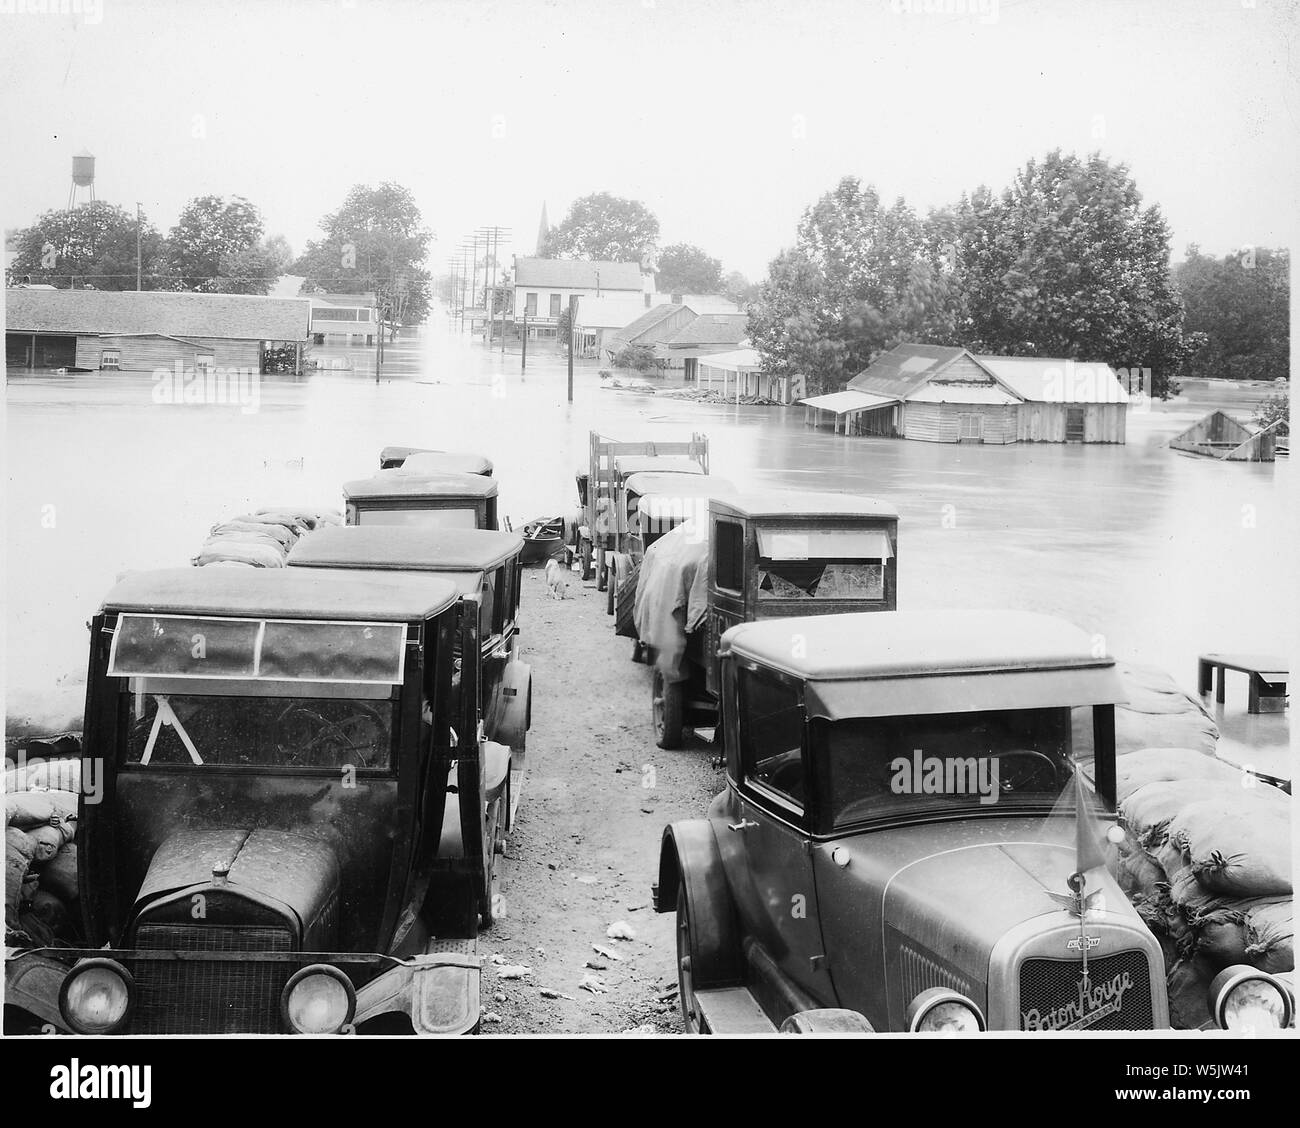 Aerial photograph of flood, unidentified stretch of lower Mississippi River.; Scope and content:  Flooded neighborhood. Cars and trucks in foreground where the streets emerges from the floodwater; inundated buildings along the flooded town street in background. Stock Photo